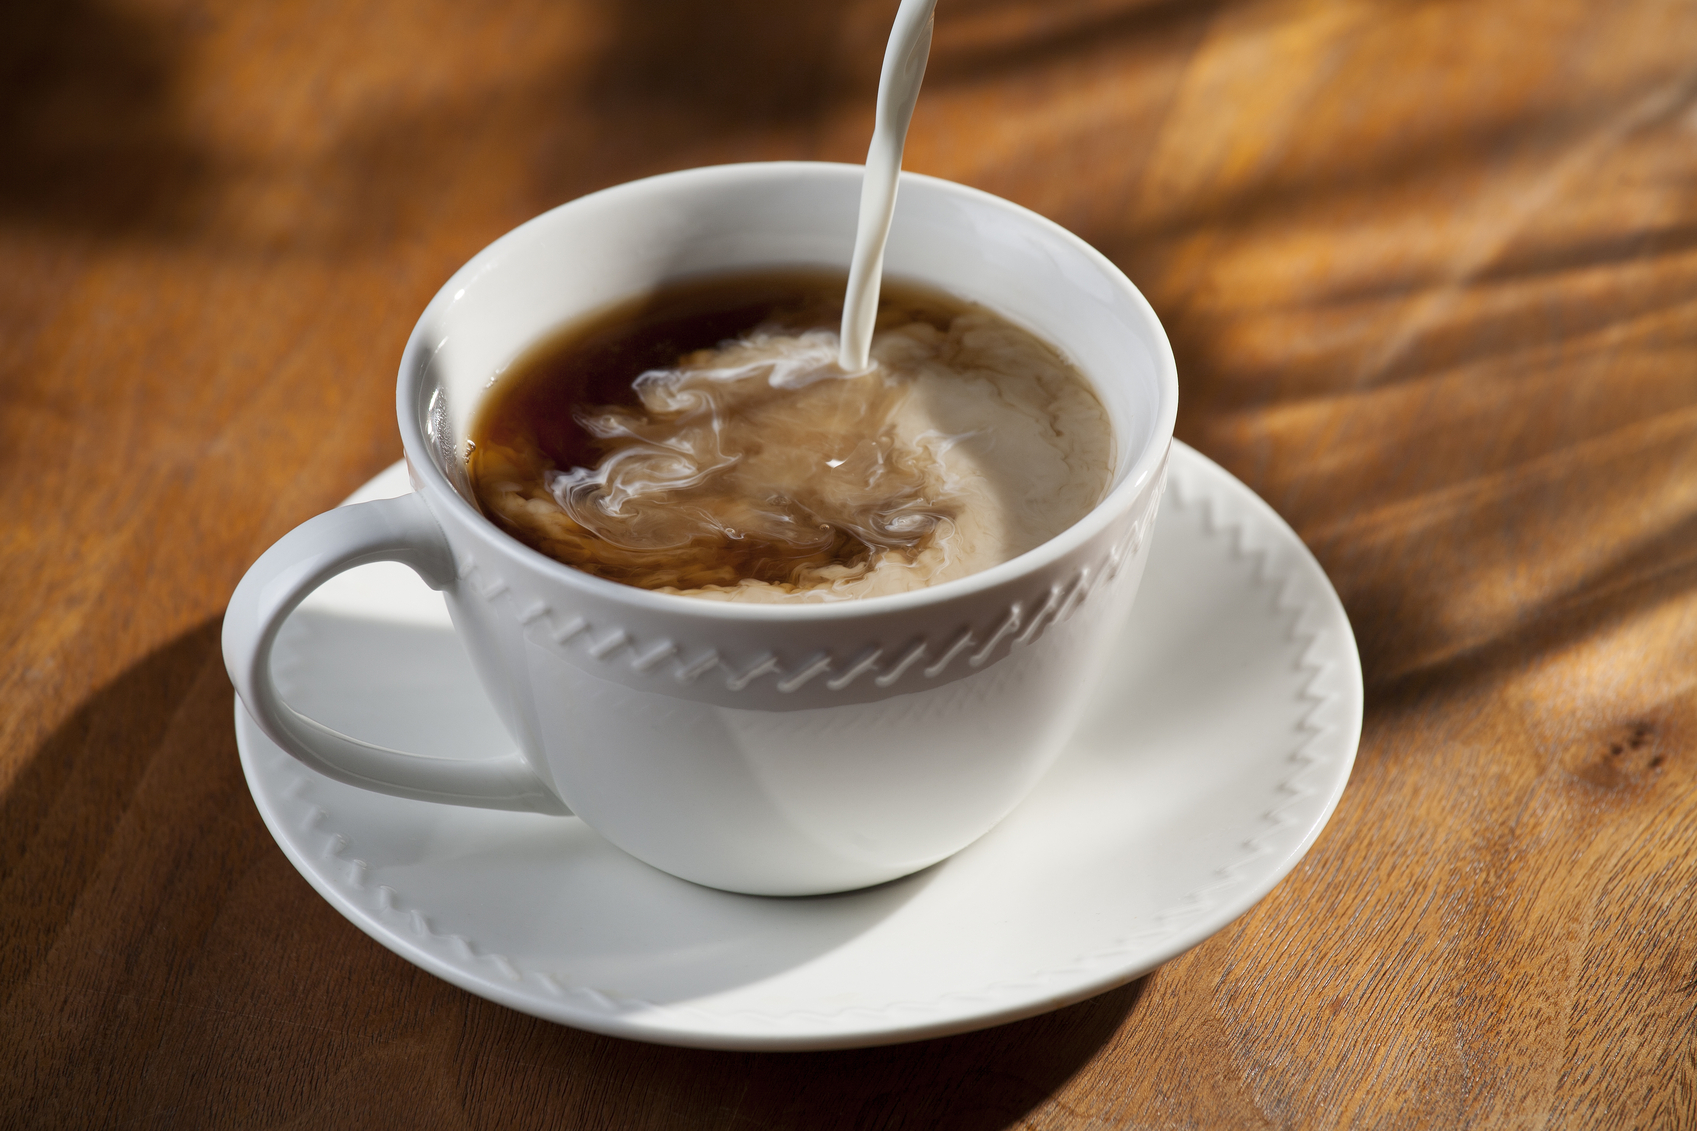 horizontal photograph of a cup of coffee with creamer being poured into it